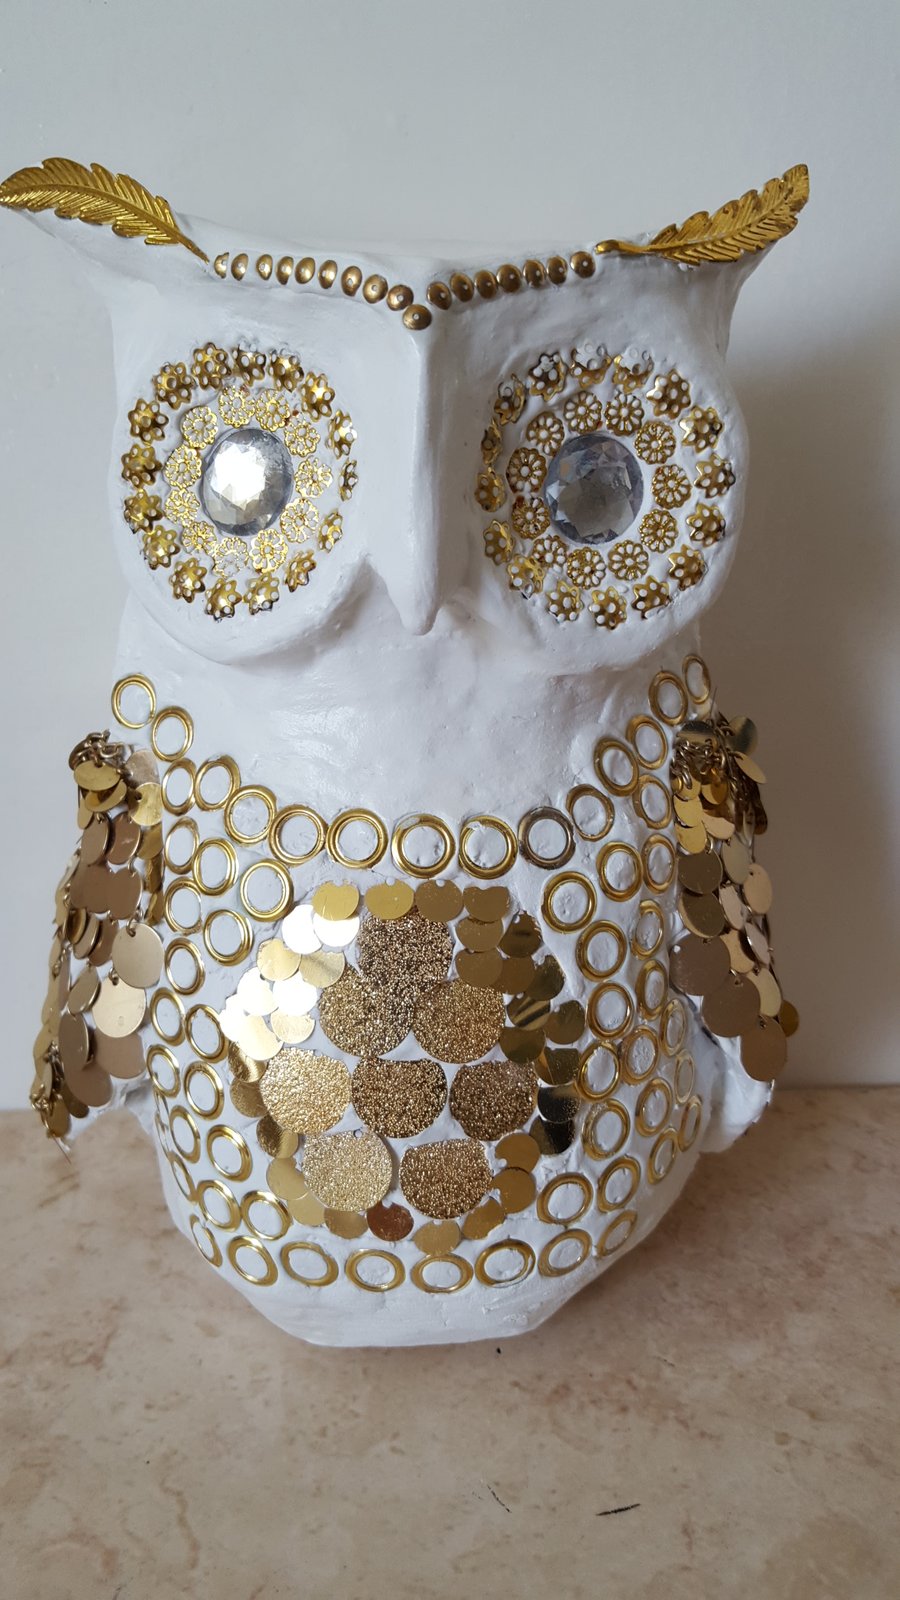 Majestic Golden Owl Sculpture with Jewelled Eyes Centrepiece Statue Ornament